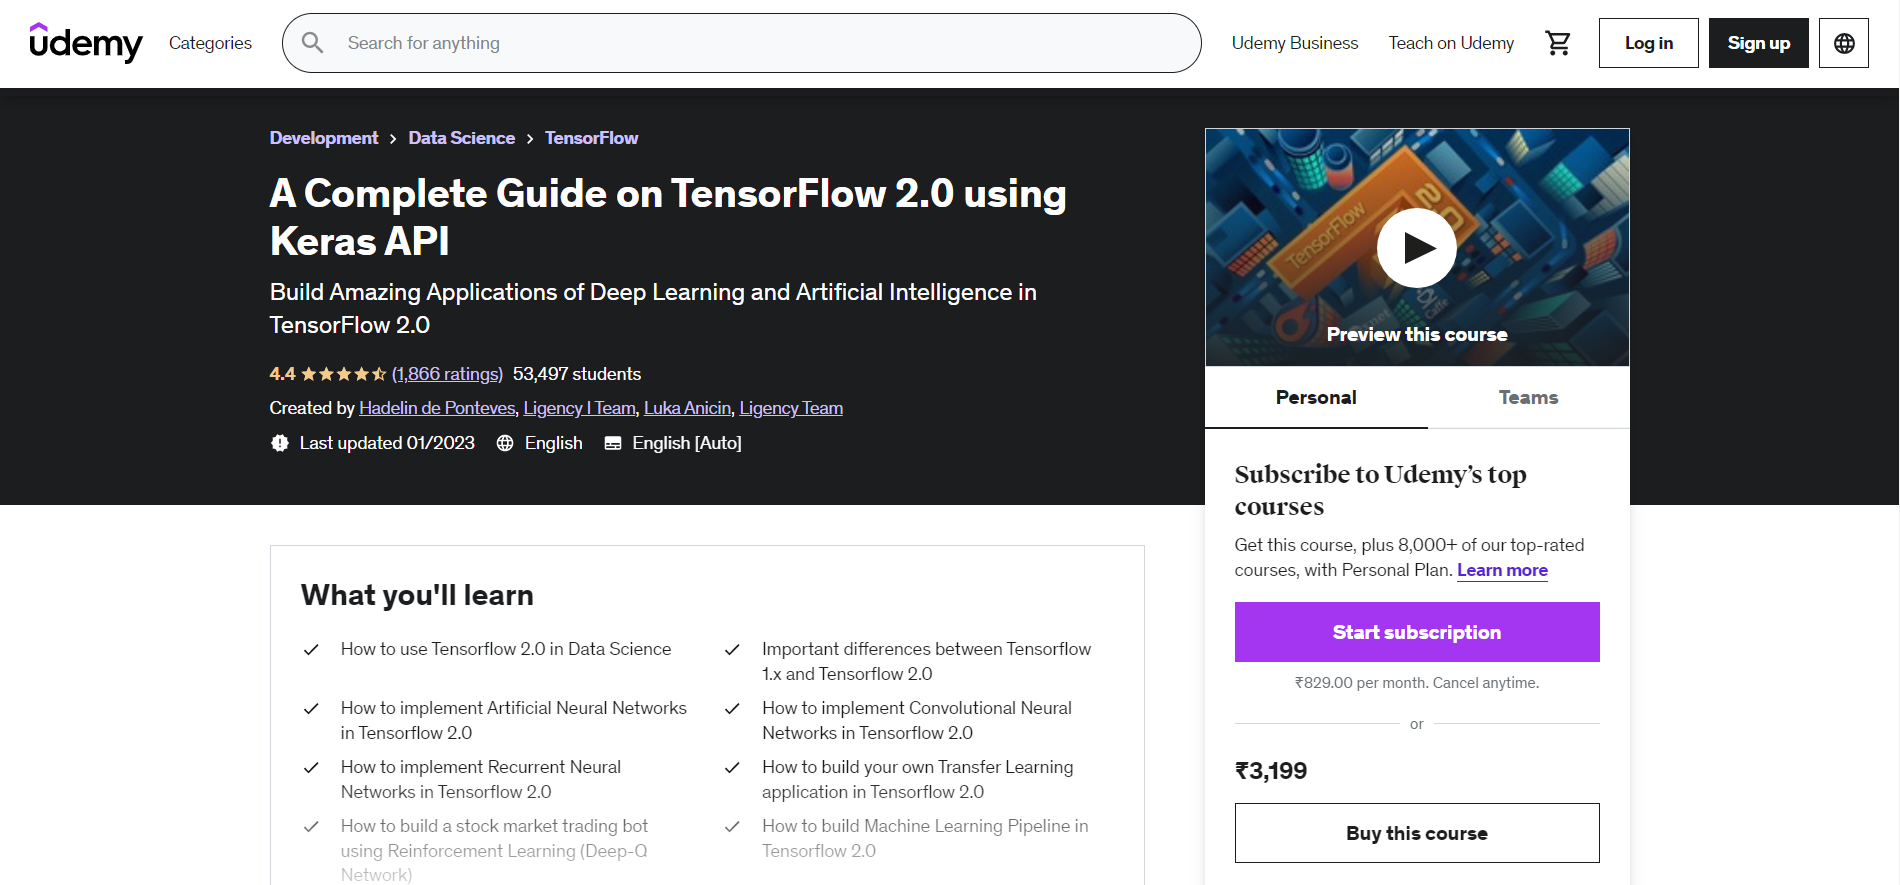 A Complete Guide on TensorFlow 2.0 using Keras API